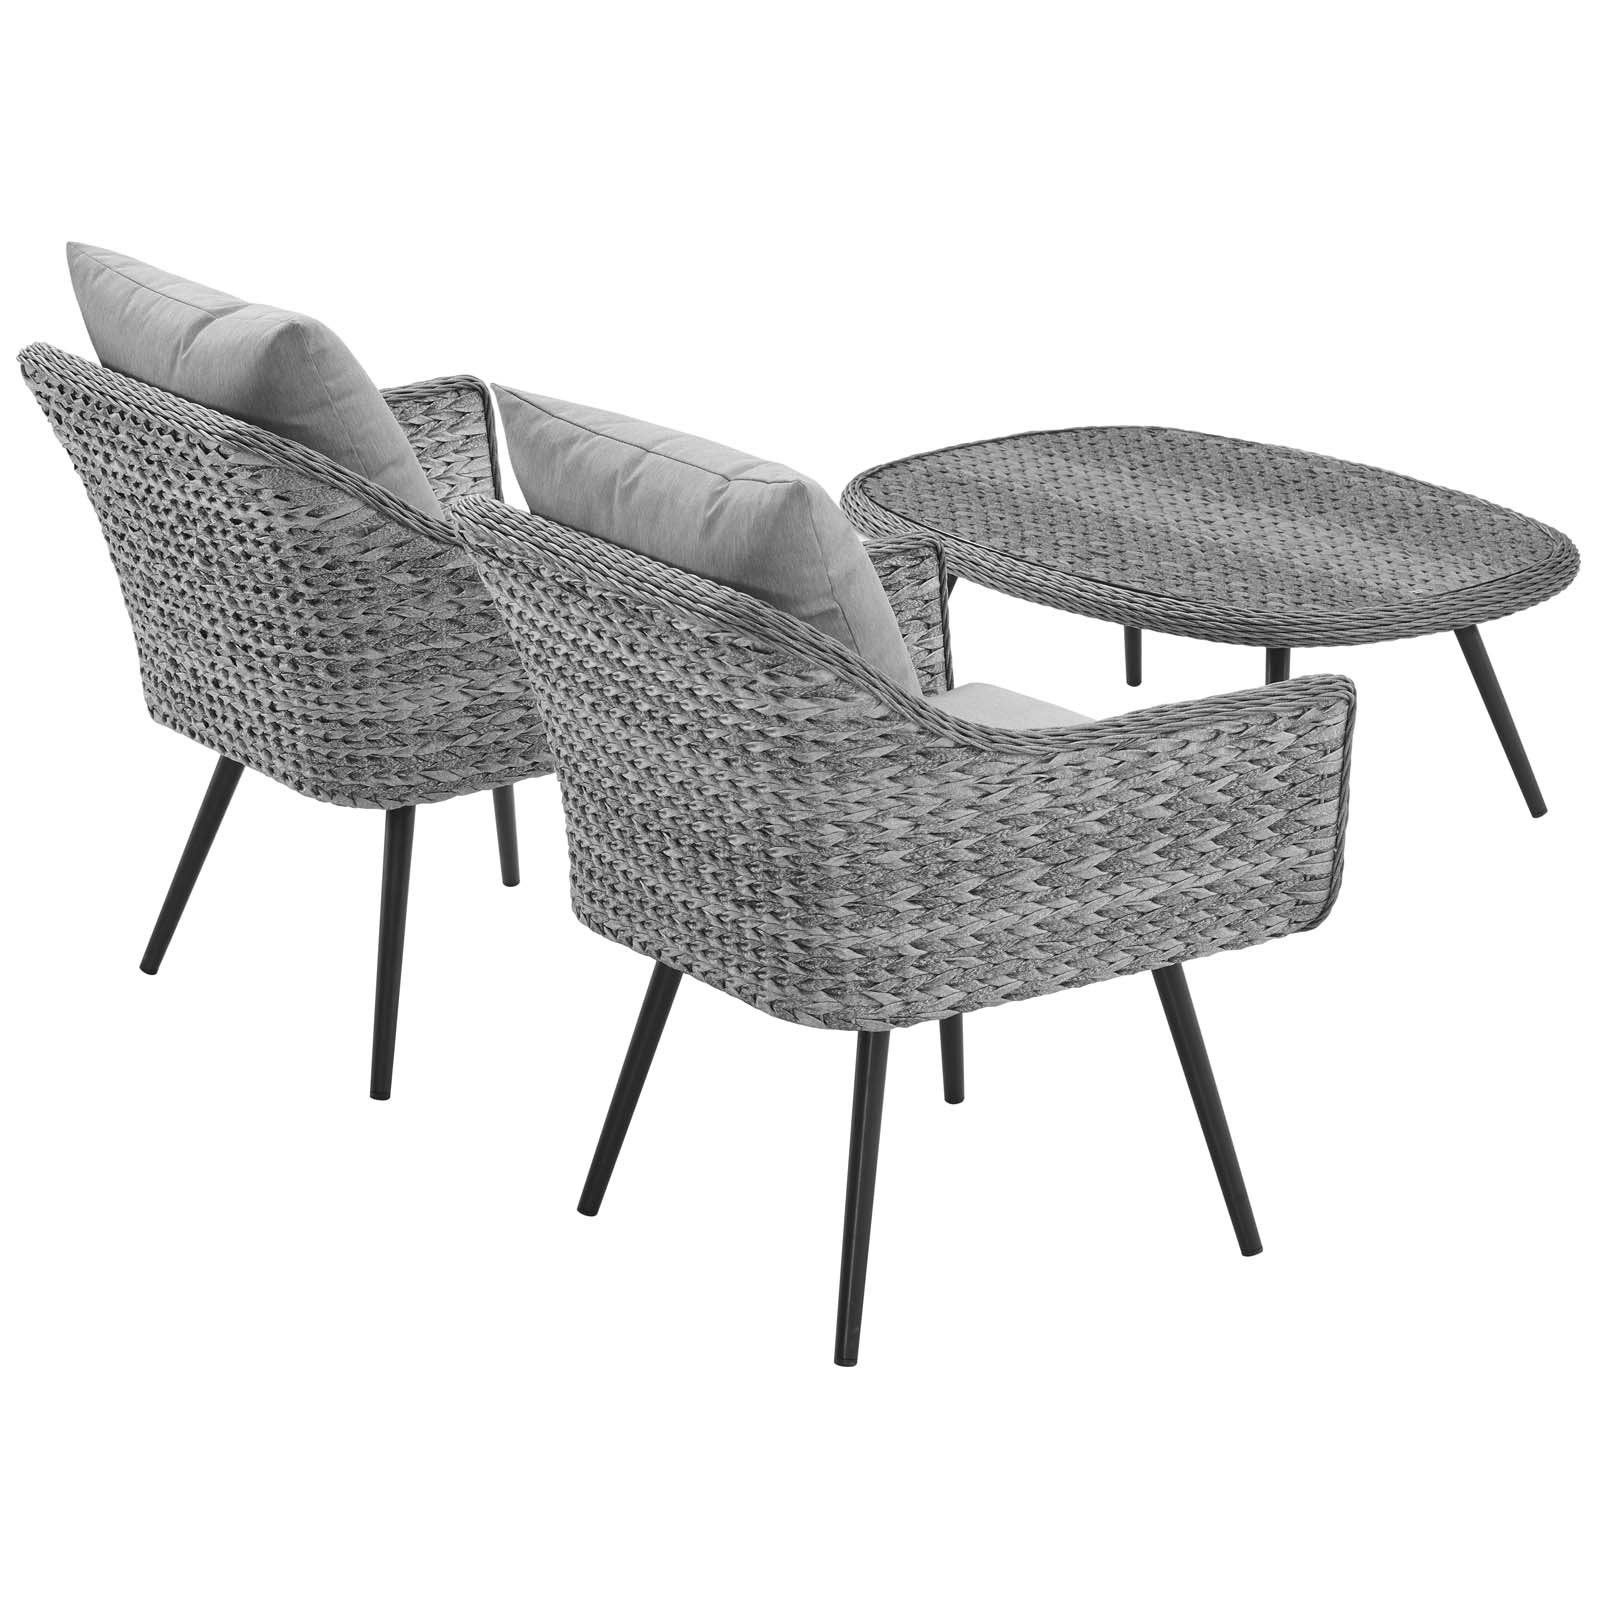 Contemporary Modern Urban Designer Outdoor Patio Balcony Garden Furniture Lounge Chair and Coffee Table Set, Aluminum Fabric Wicker Rattan, Grey Gray - image 5 of 8